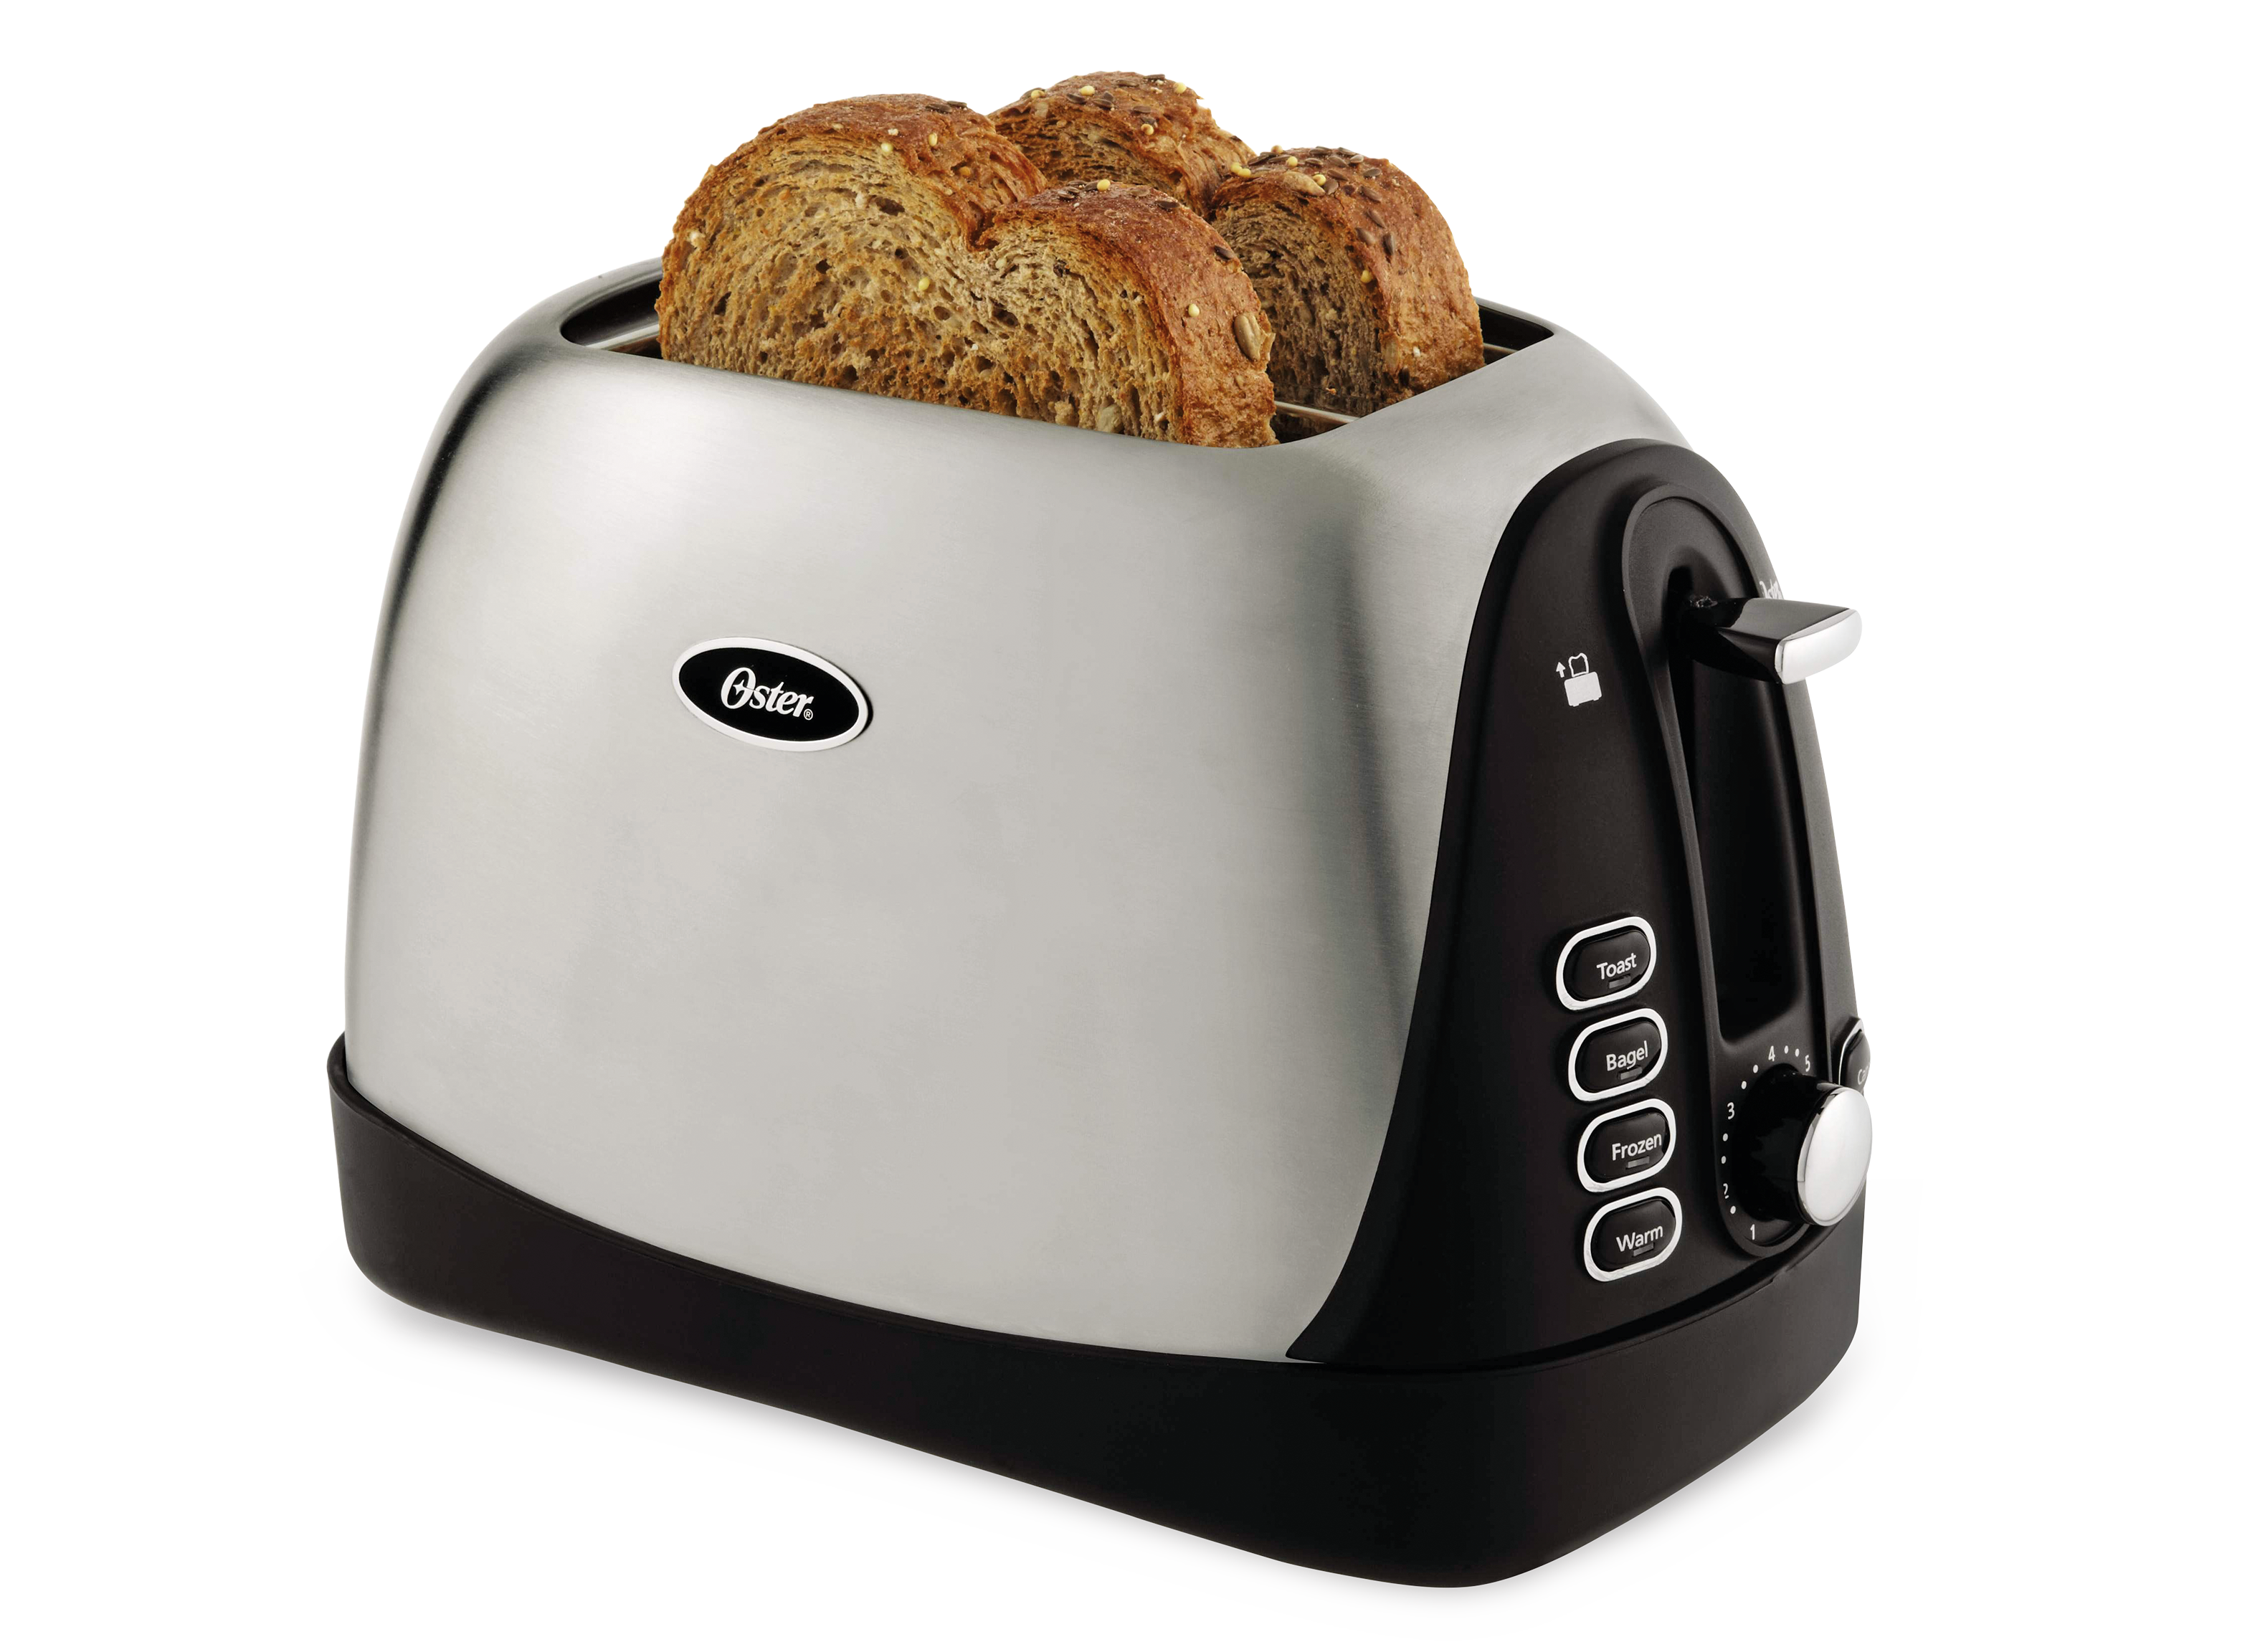 https://crdms.images.consumerreports.org/prod/products/cr/models/395991-2-slice-toasters-oster-2-slice-stainless-steel-tssttrjb2s-62625.png